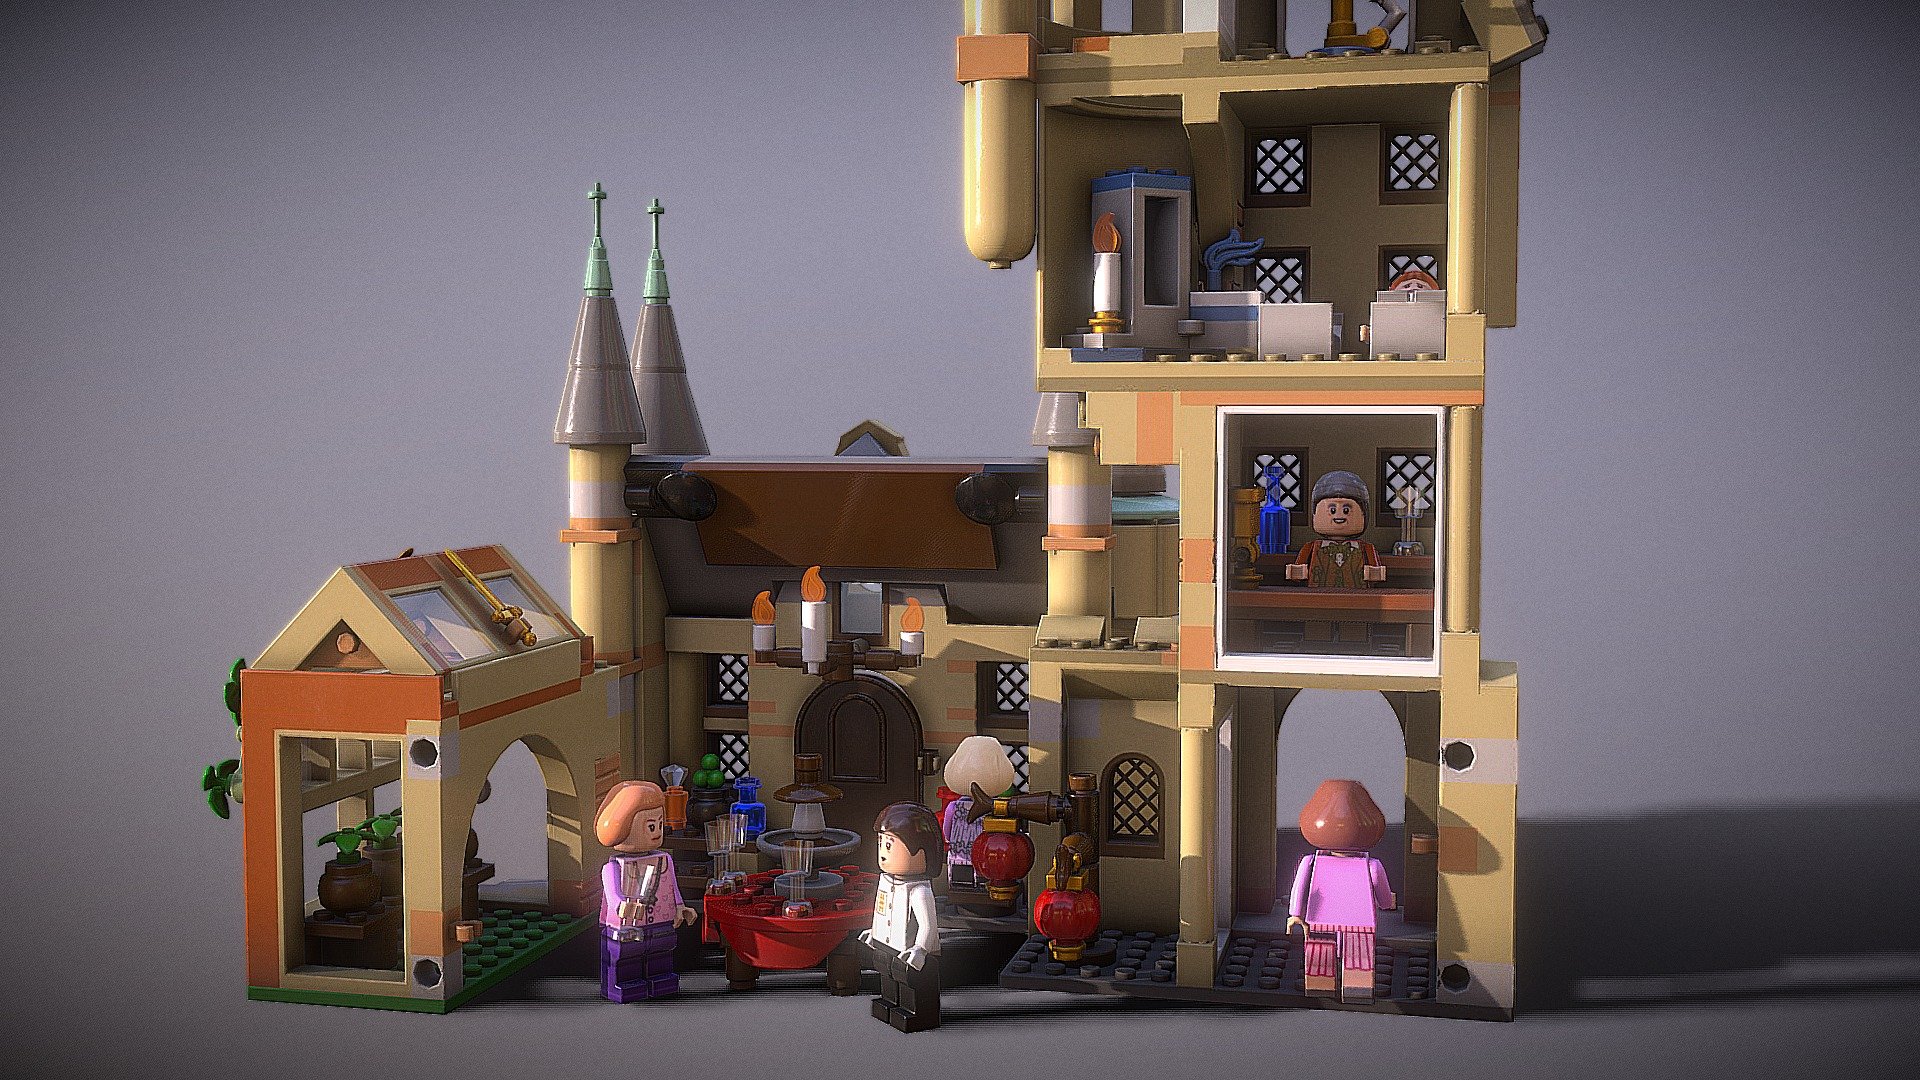 Virtual toy made for Carrefour and http://www.many-worlds.es - Lego Hogwarts AstronomyTower, Many-worlds - 3D model by Guillermo Momplet (@momplet) 3d model